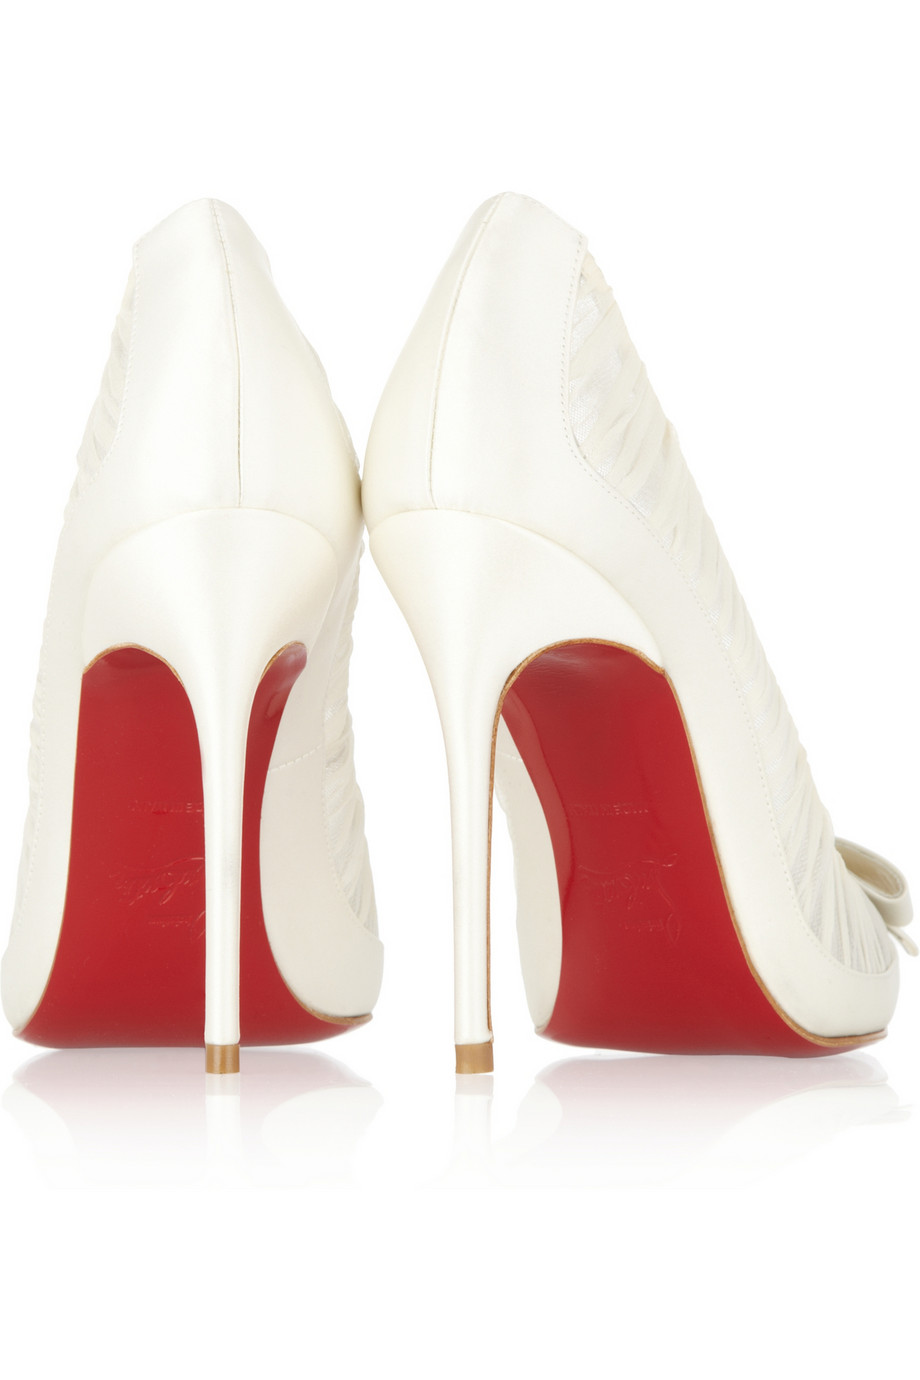 white louboutin shoes - Obsidian Wellness Centre